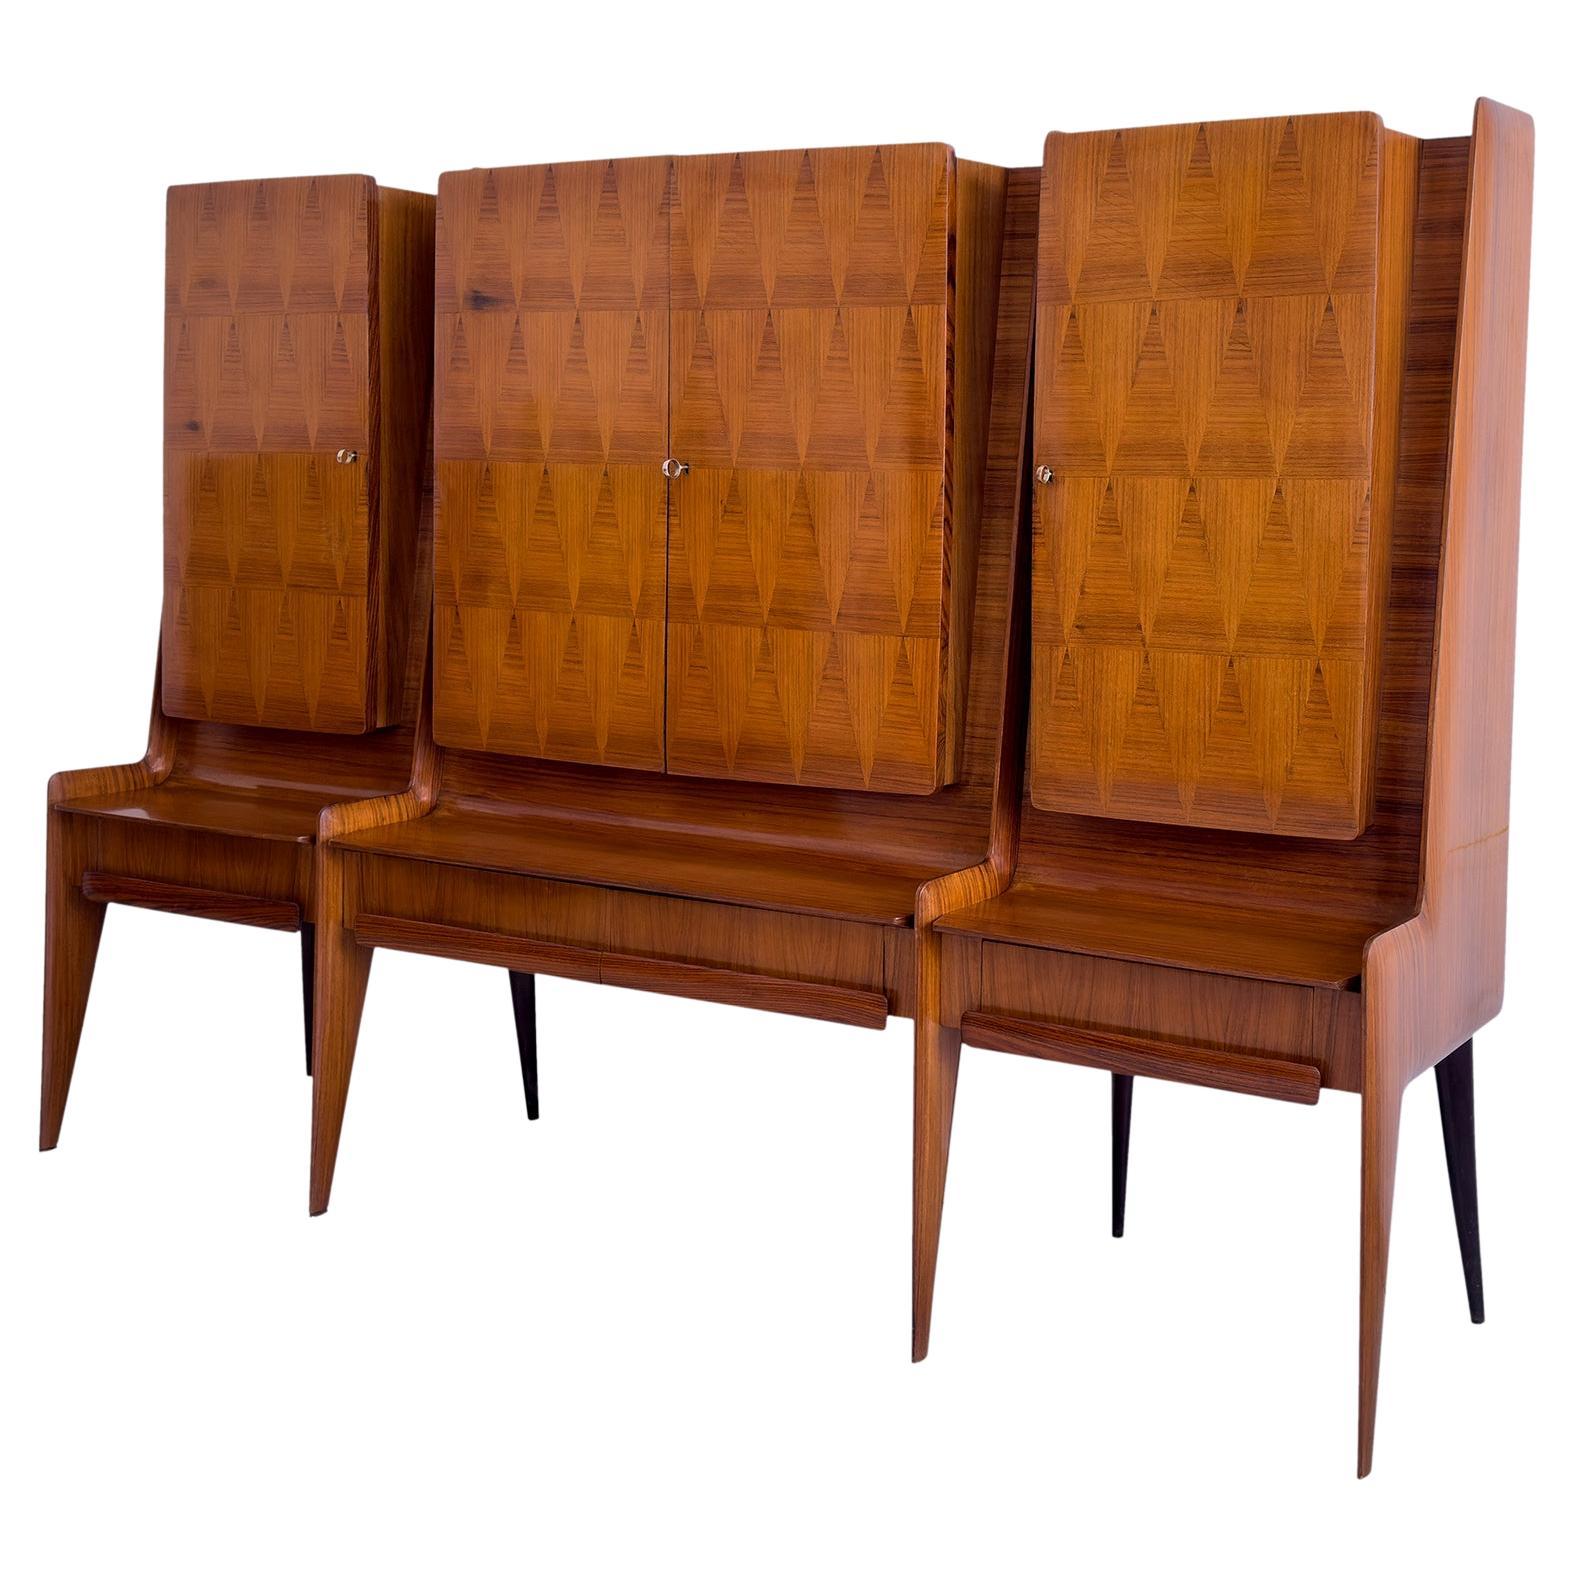 Italian Mid-Century Sideboard with Dry Bar by La Permanente Mobili Cantù, 1950s